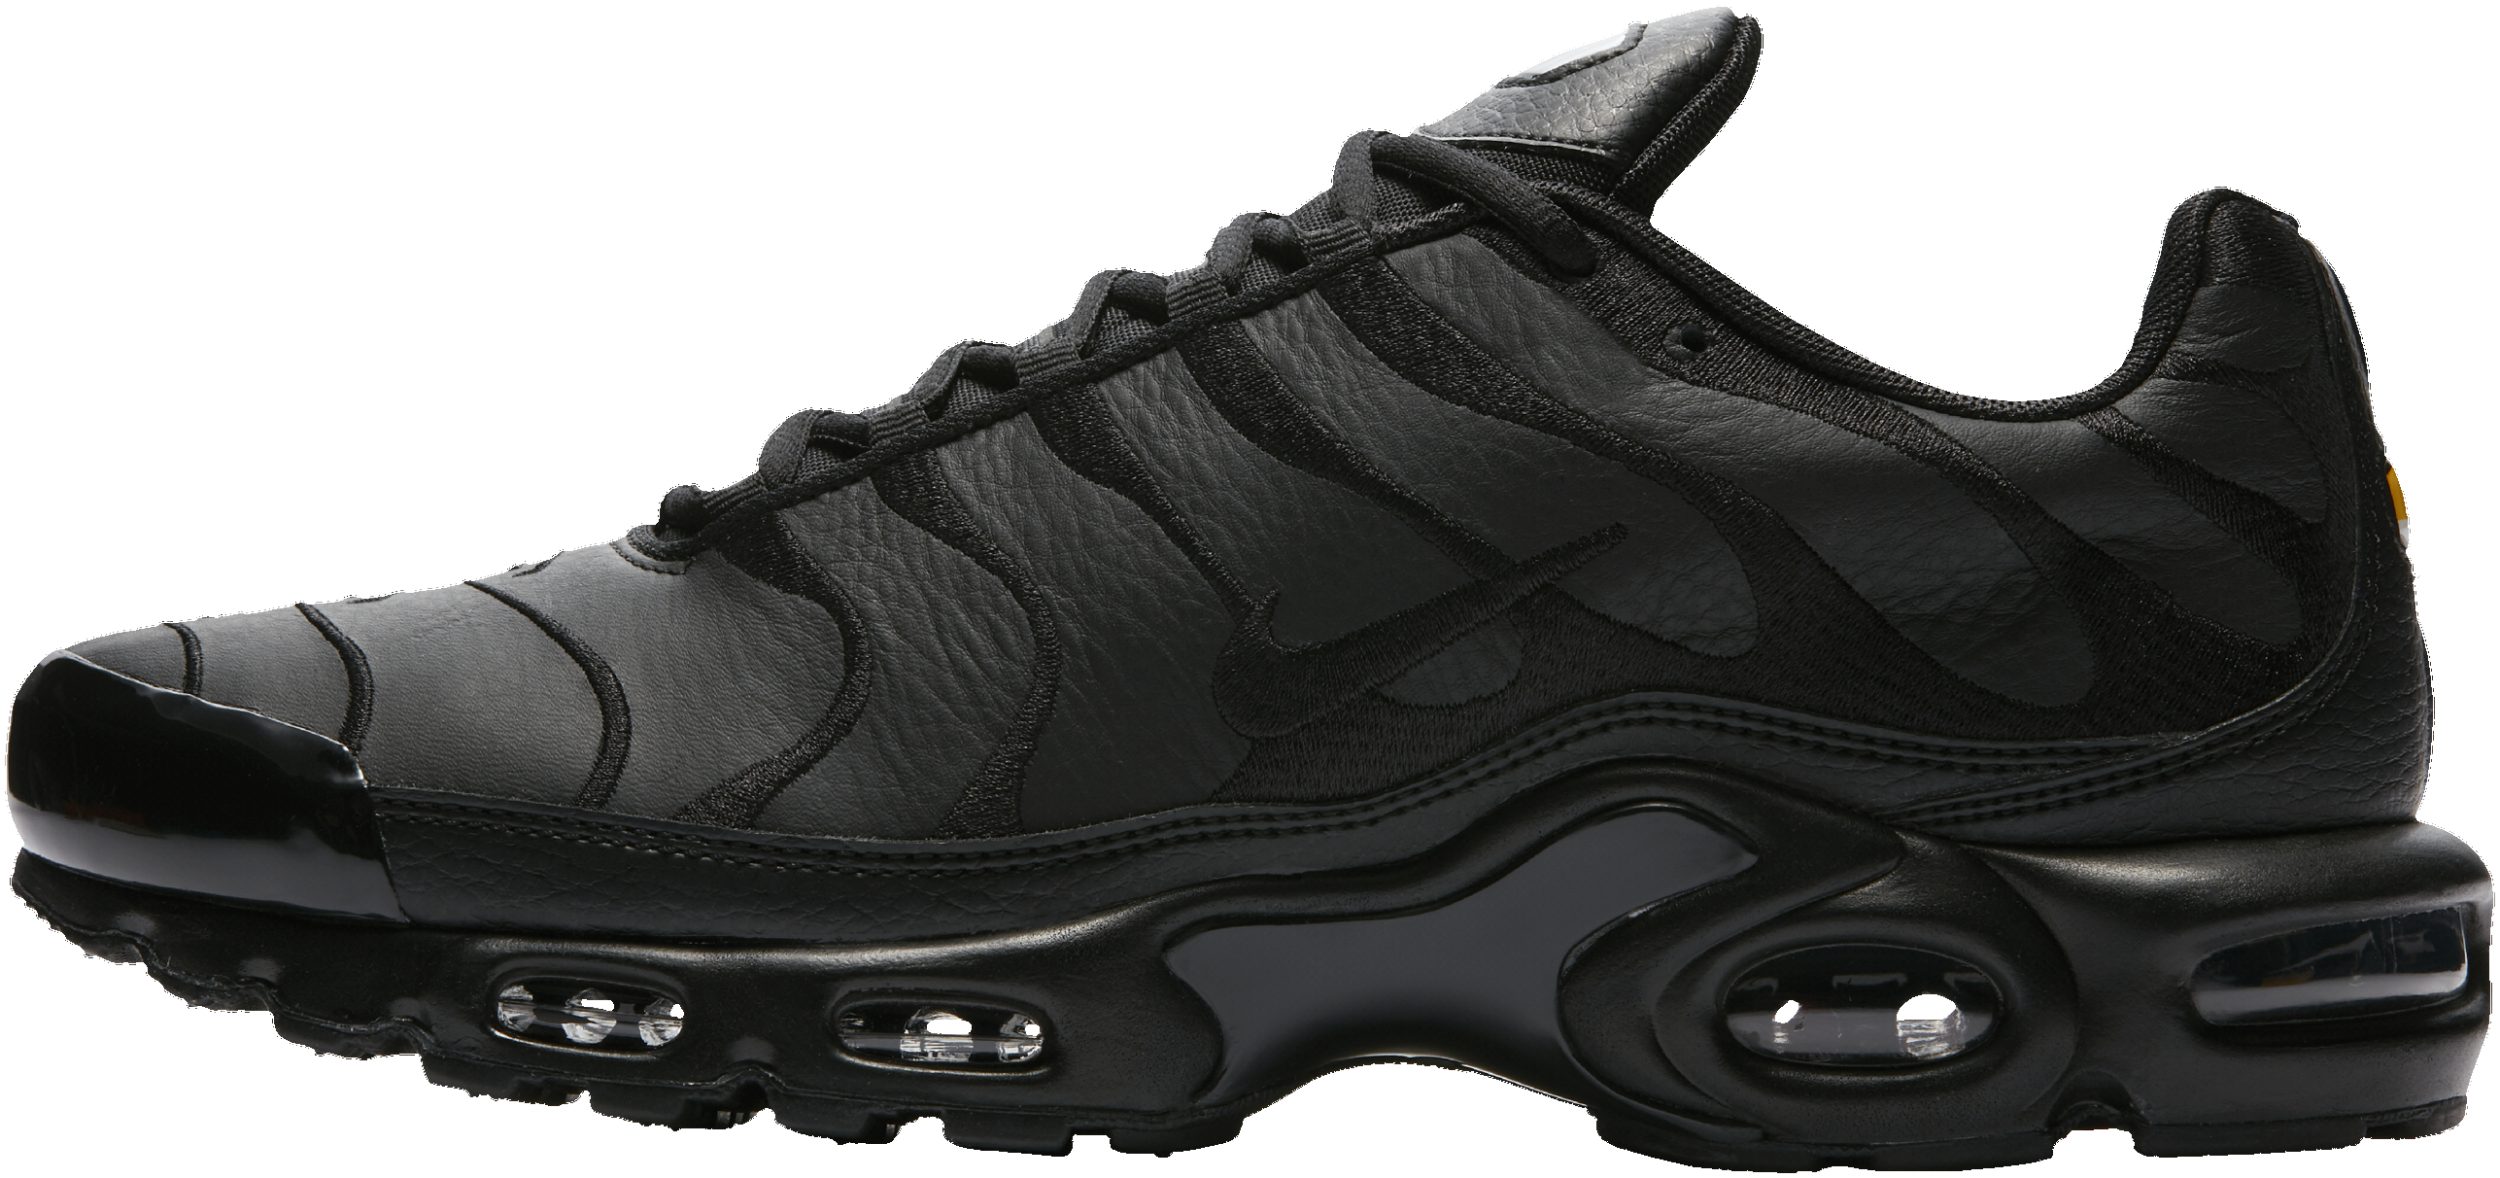 Only £81 + Review of Nike Air Max Plus 